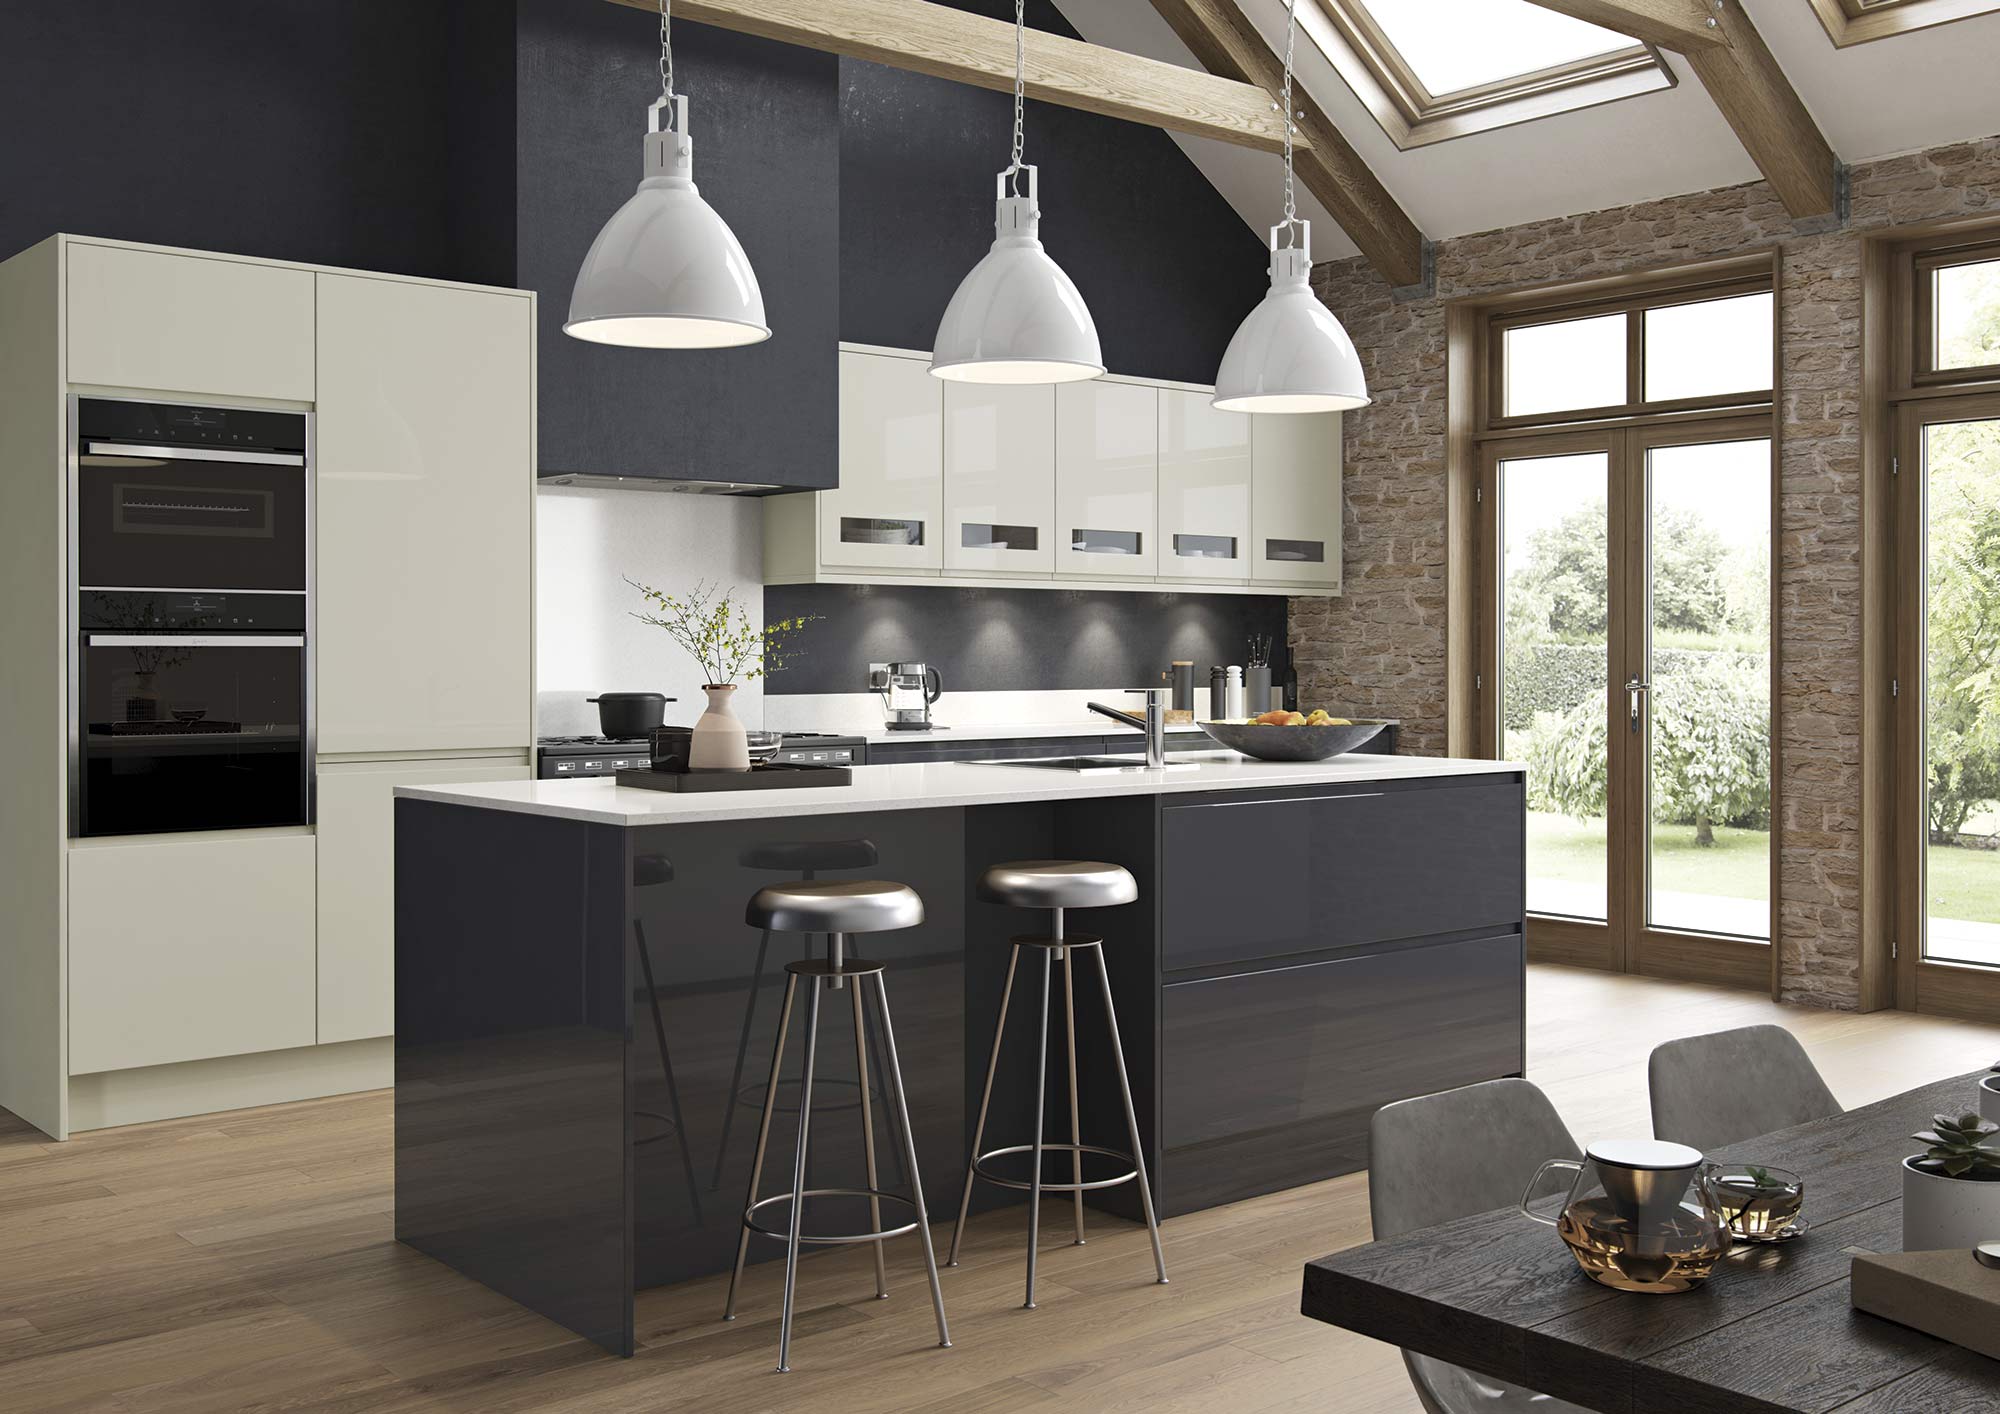 J-pull handleless gloss kitchen graphite and porcelain picture 2